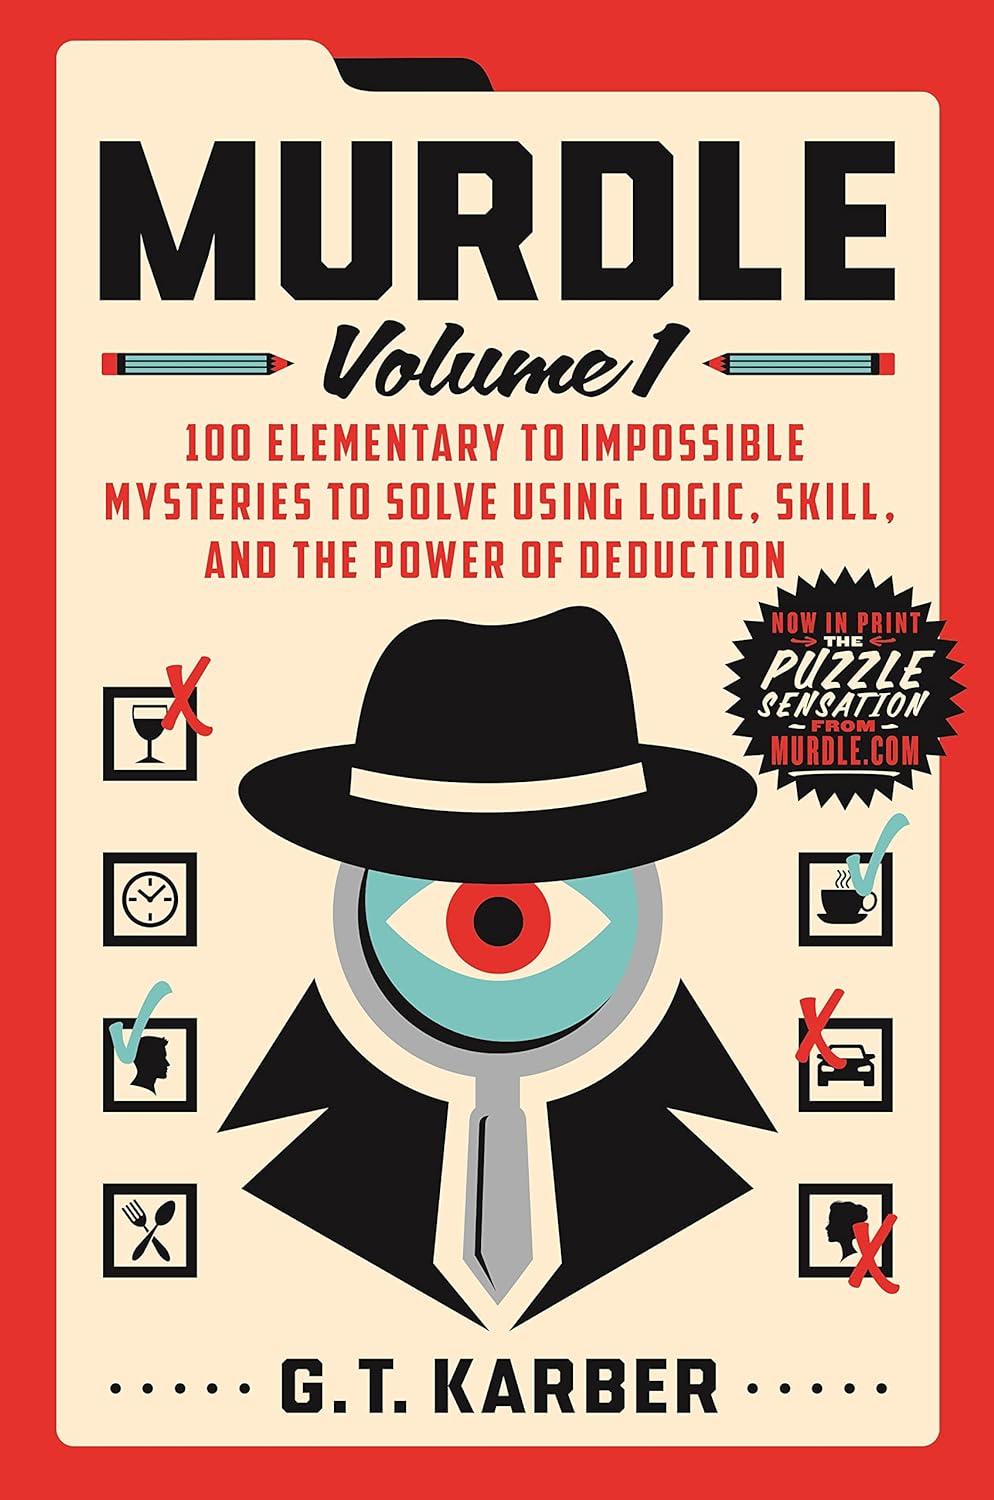 Murdle: Volume 1: 100 Elementary to Impossible Mysteries to Solve Using Logic, Skill, and the Power of Deduction - by G. T. Karber